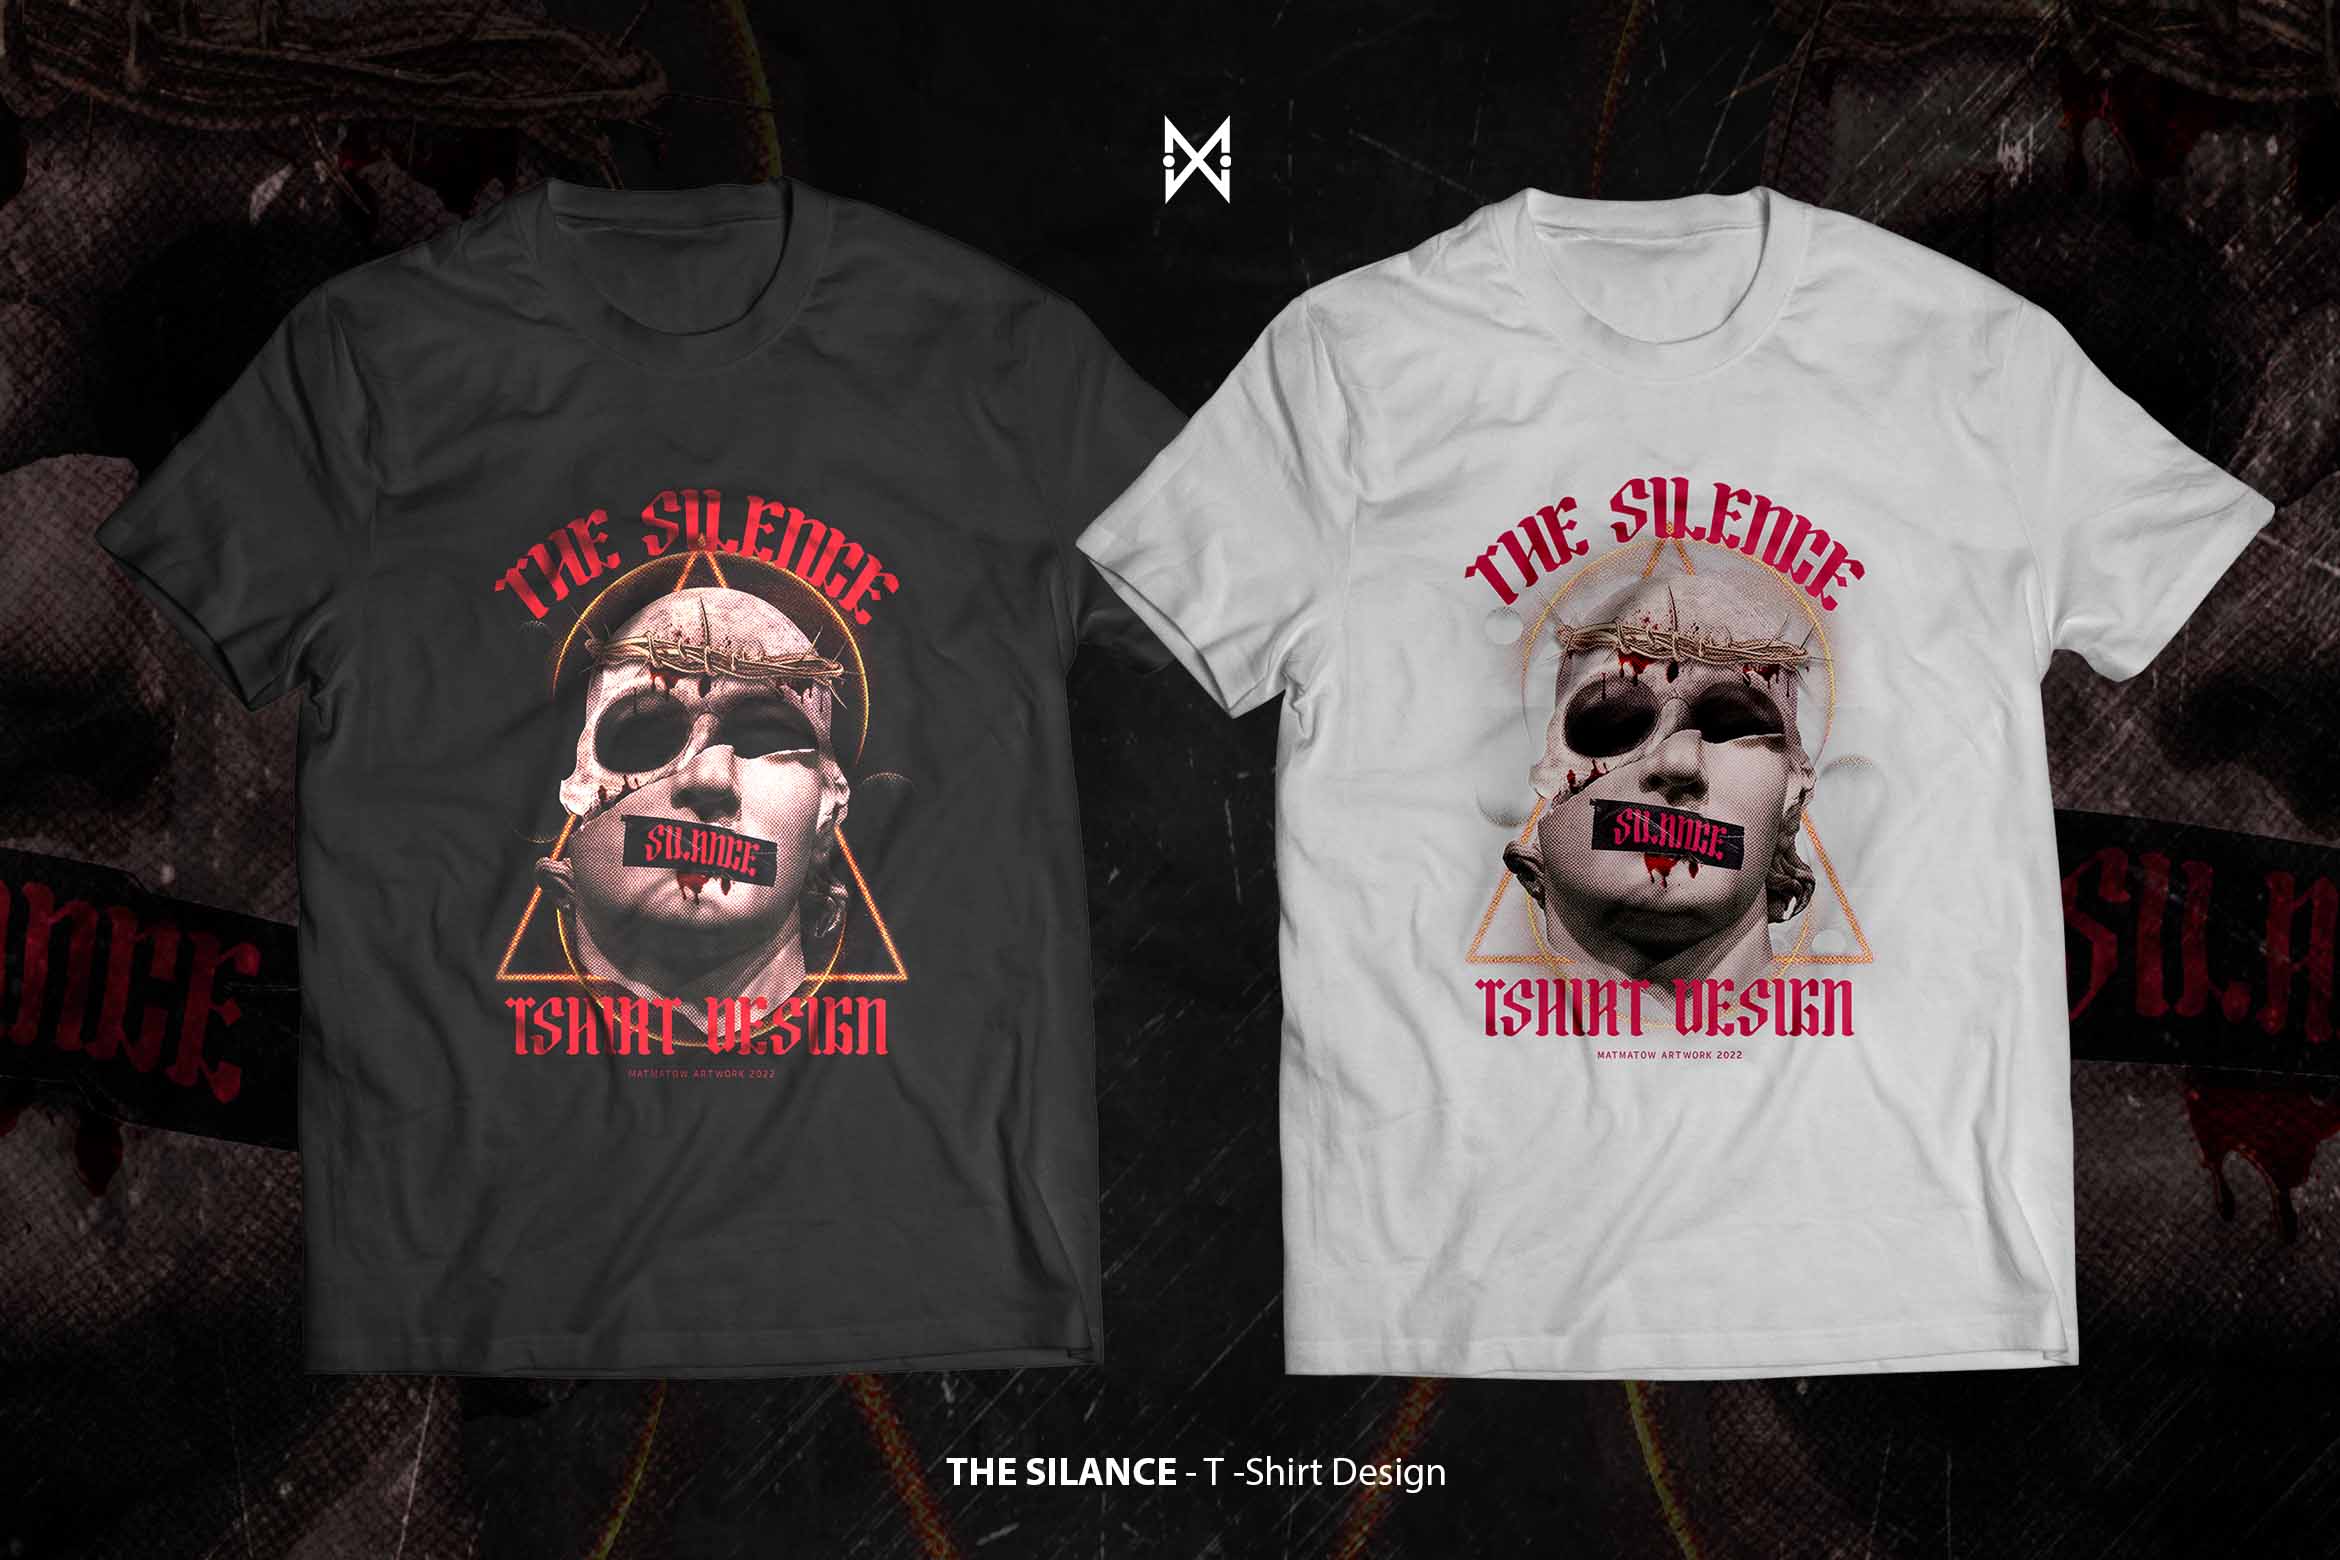 A collection of t-shirts with an amazing horror-themed print.